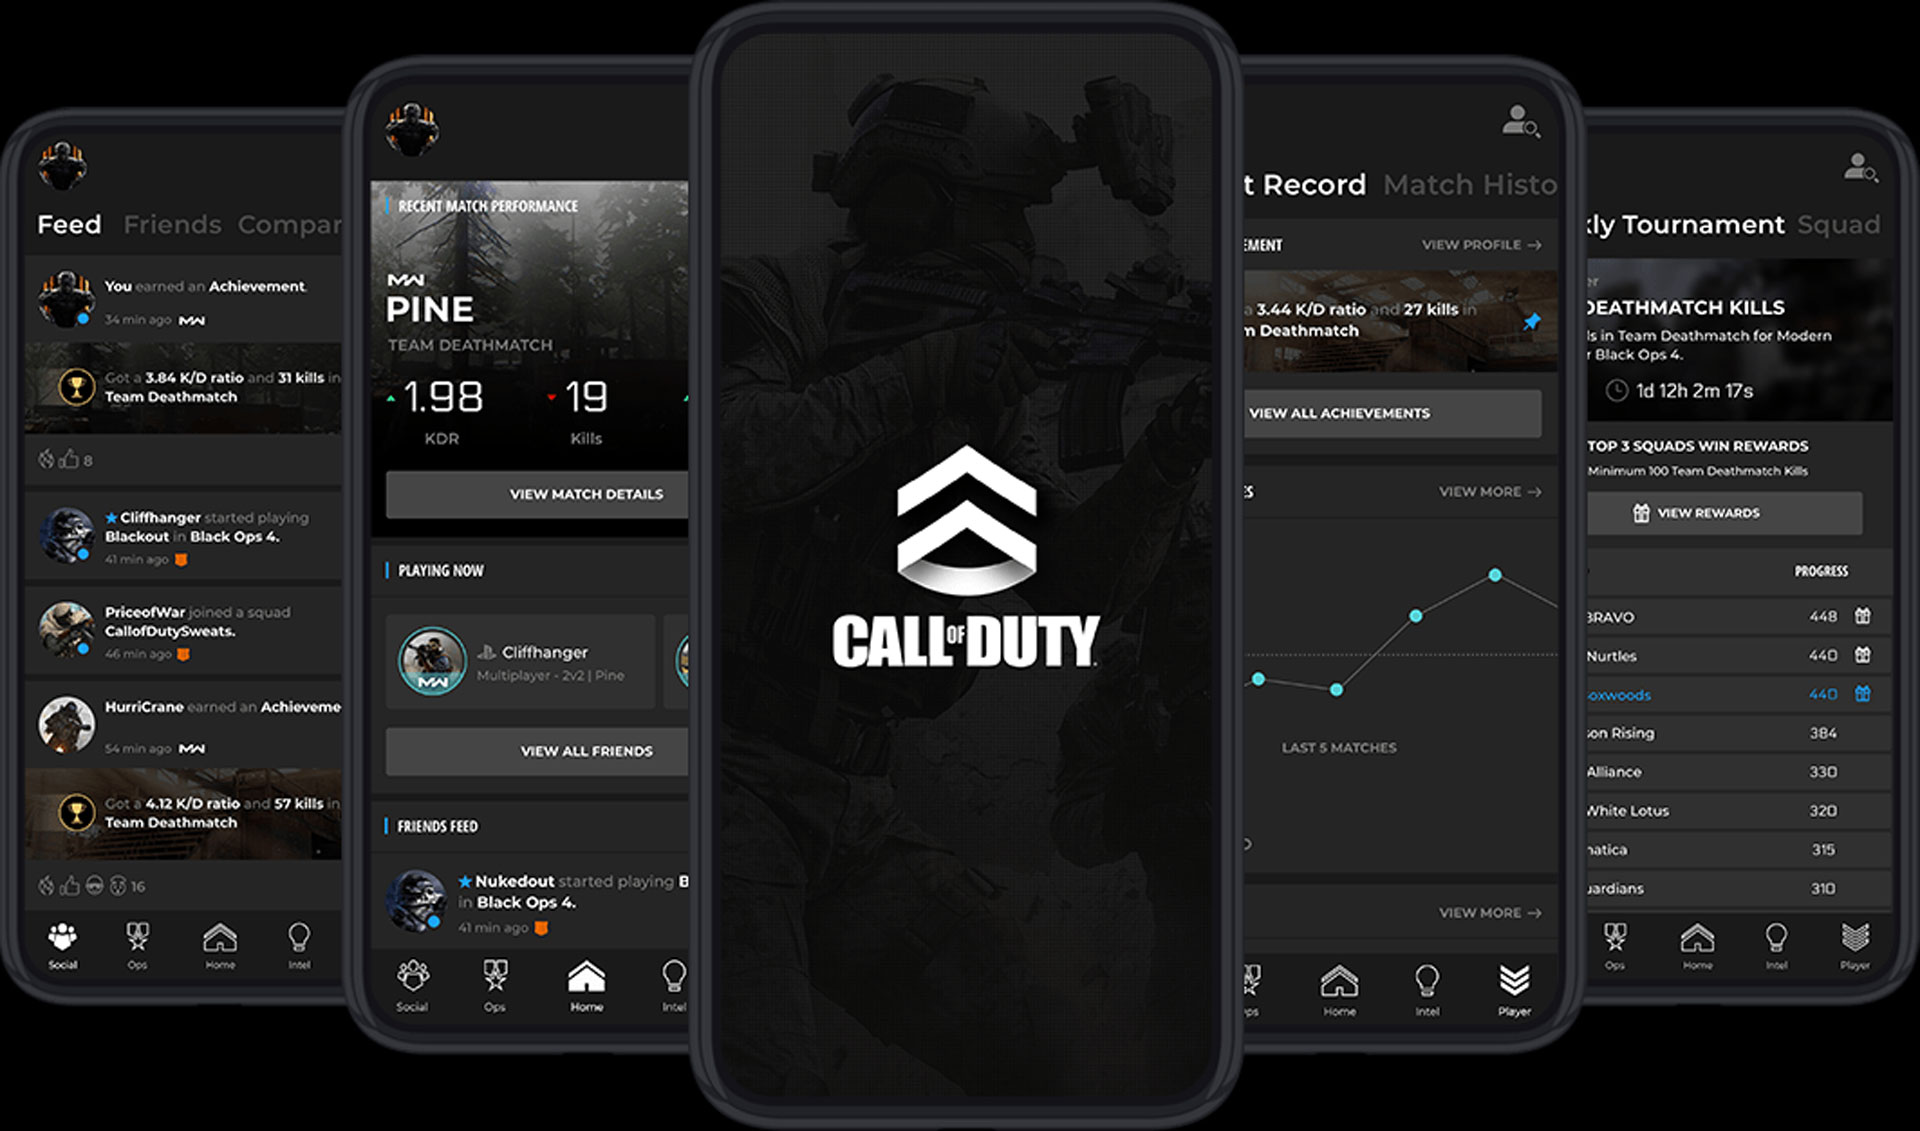 Get More Modern Warfare Rewards With The Call Of Duty Companion App